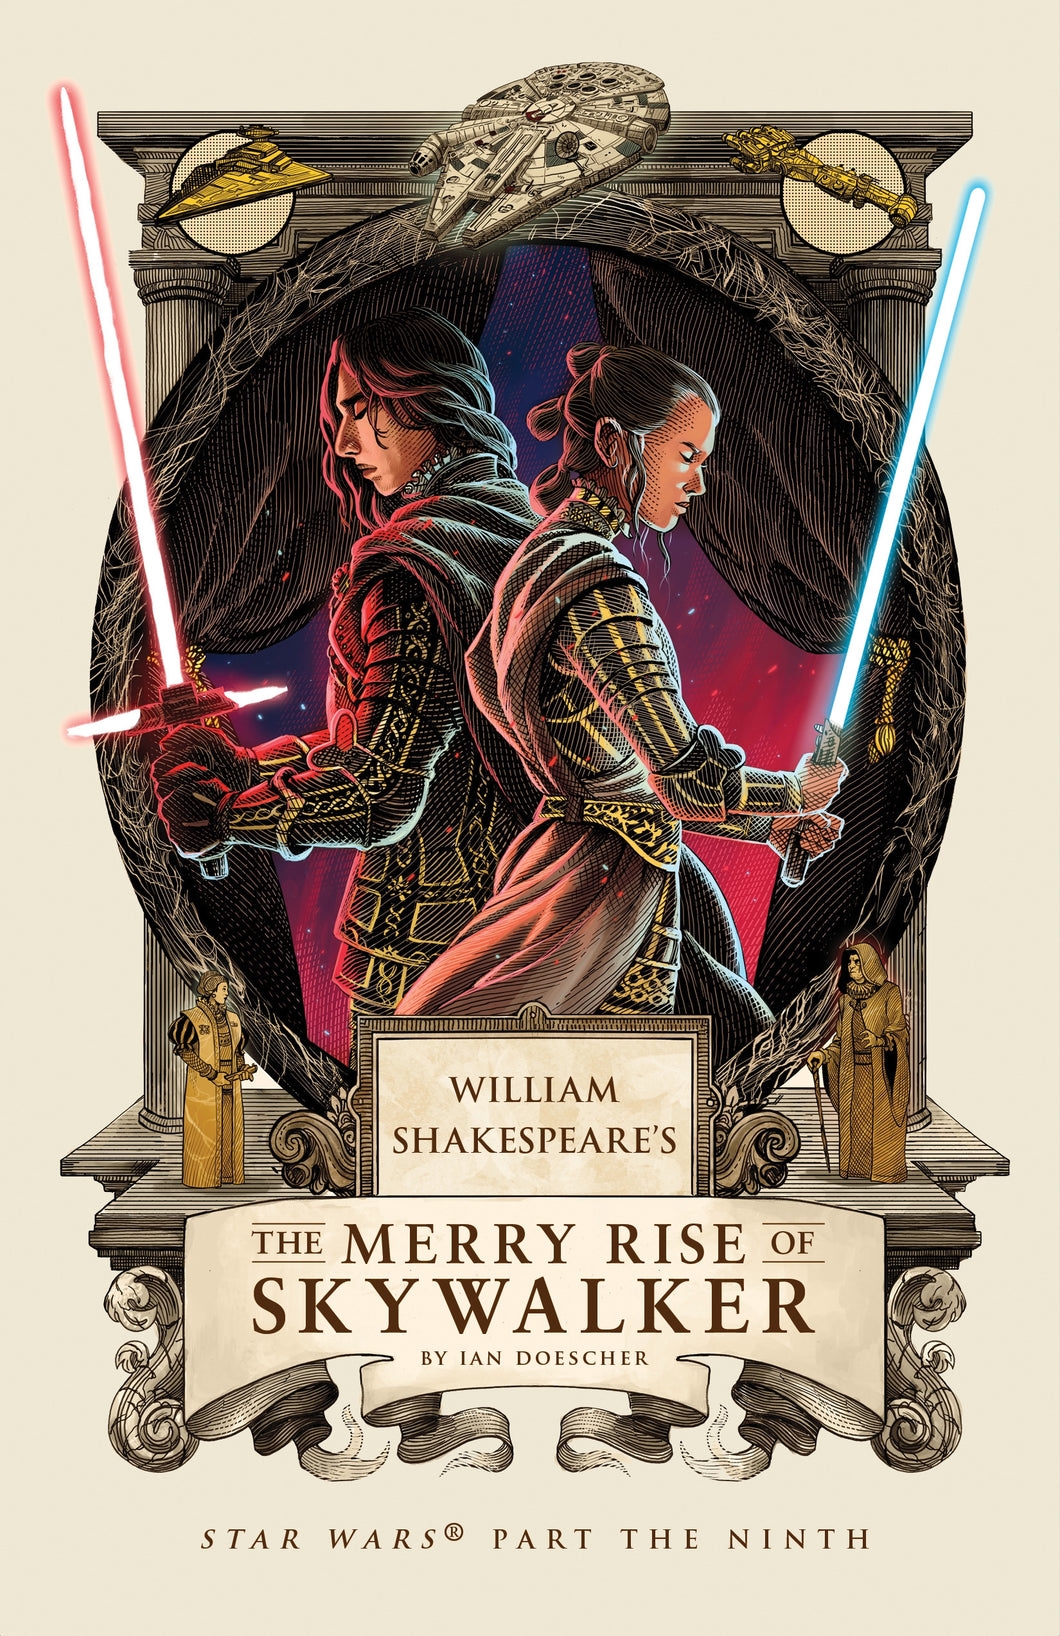 William Shakespeare: Star Wars Part the 9th - The Merry Rise of Skywalker